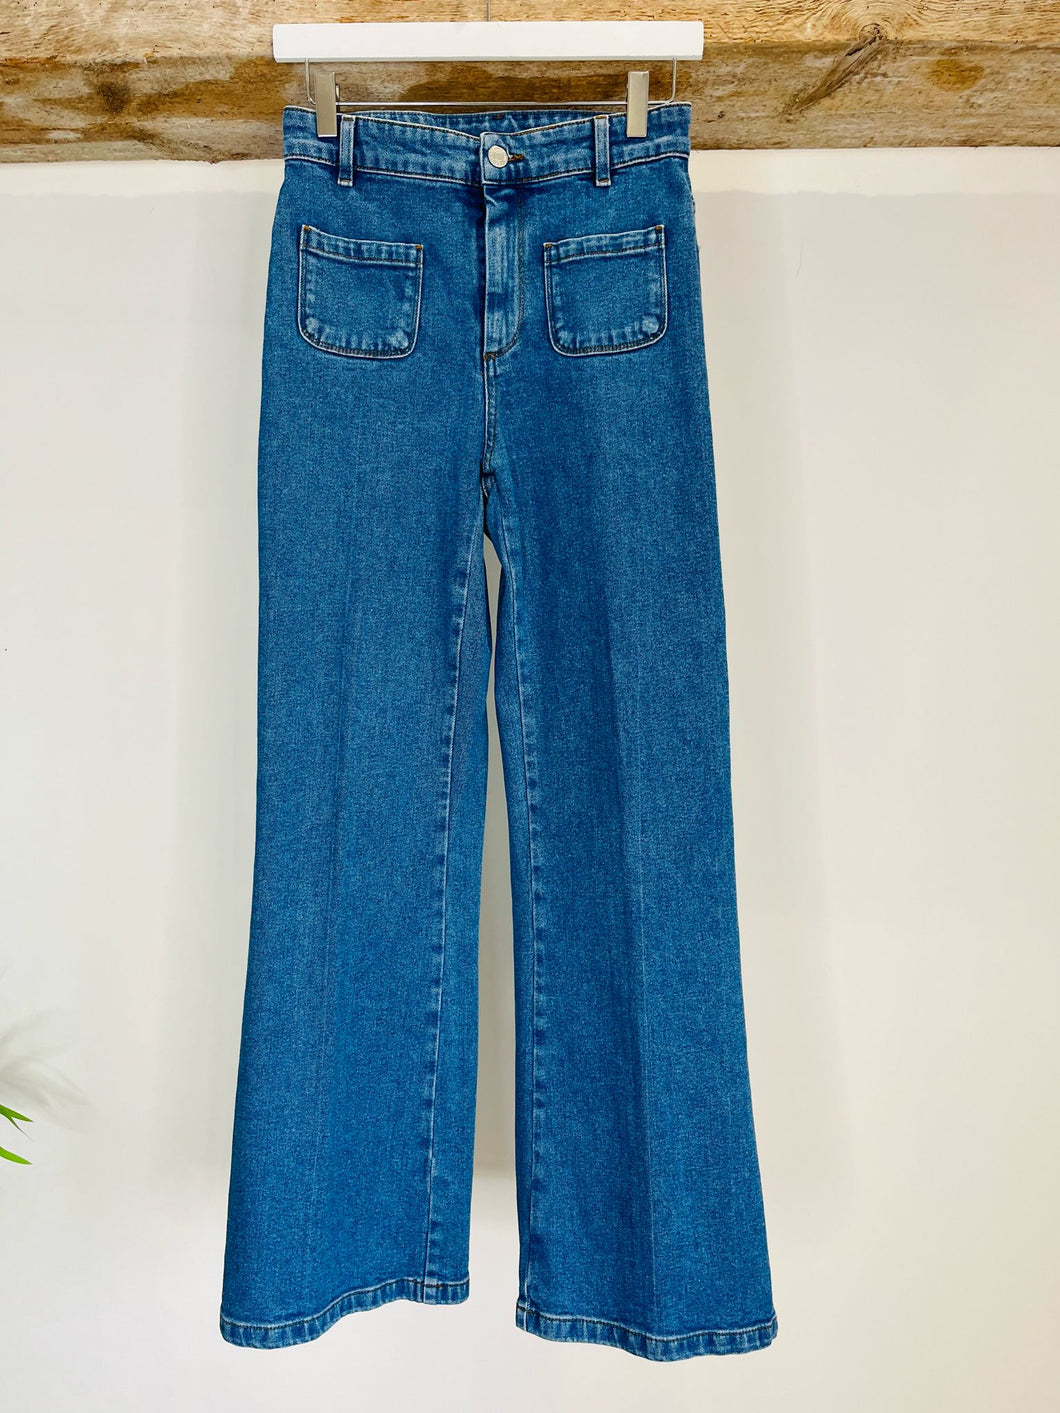 Park Flared Jeans - Size 1